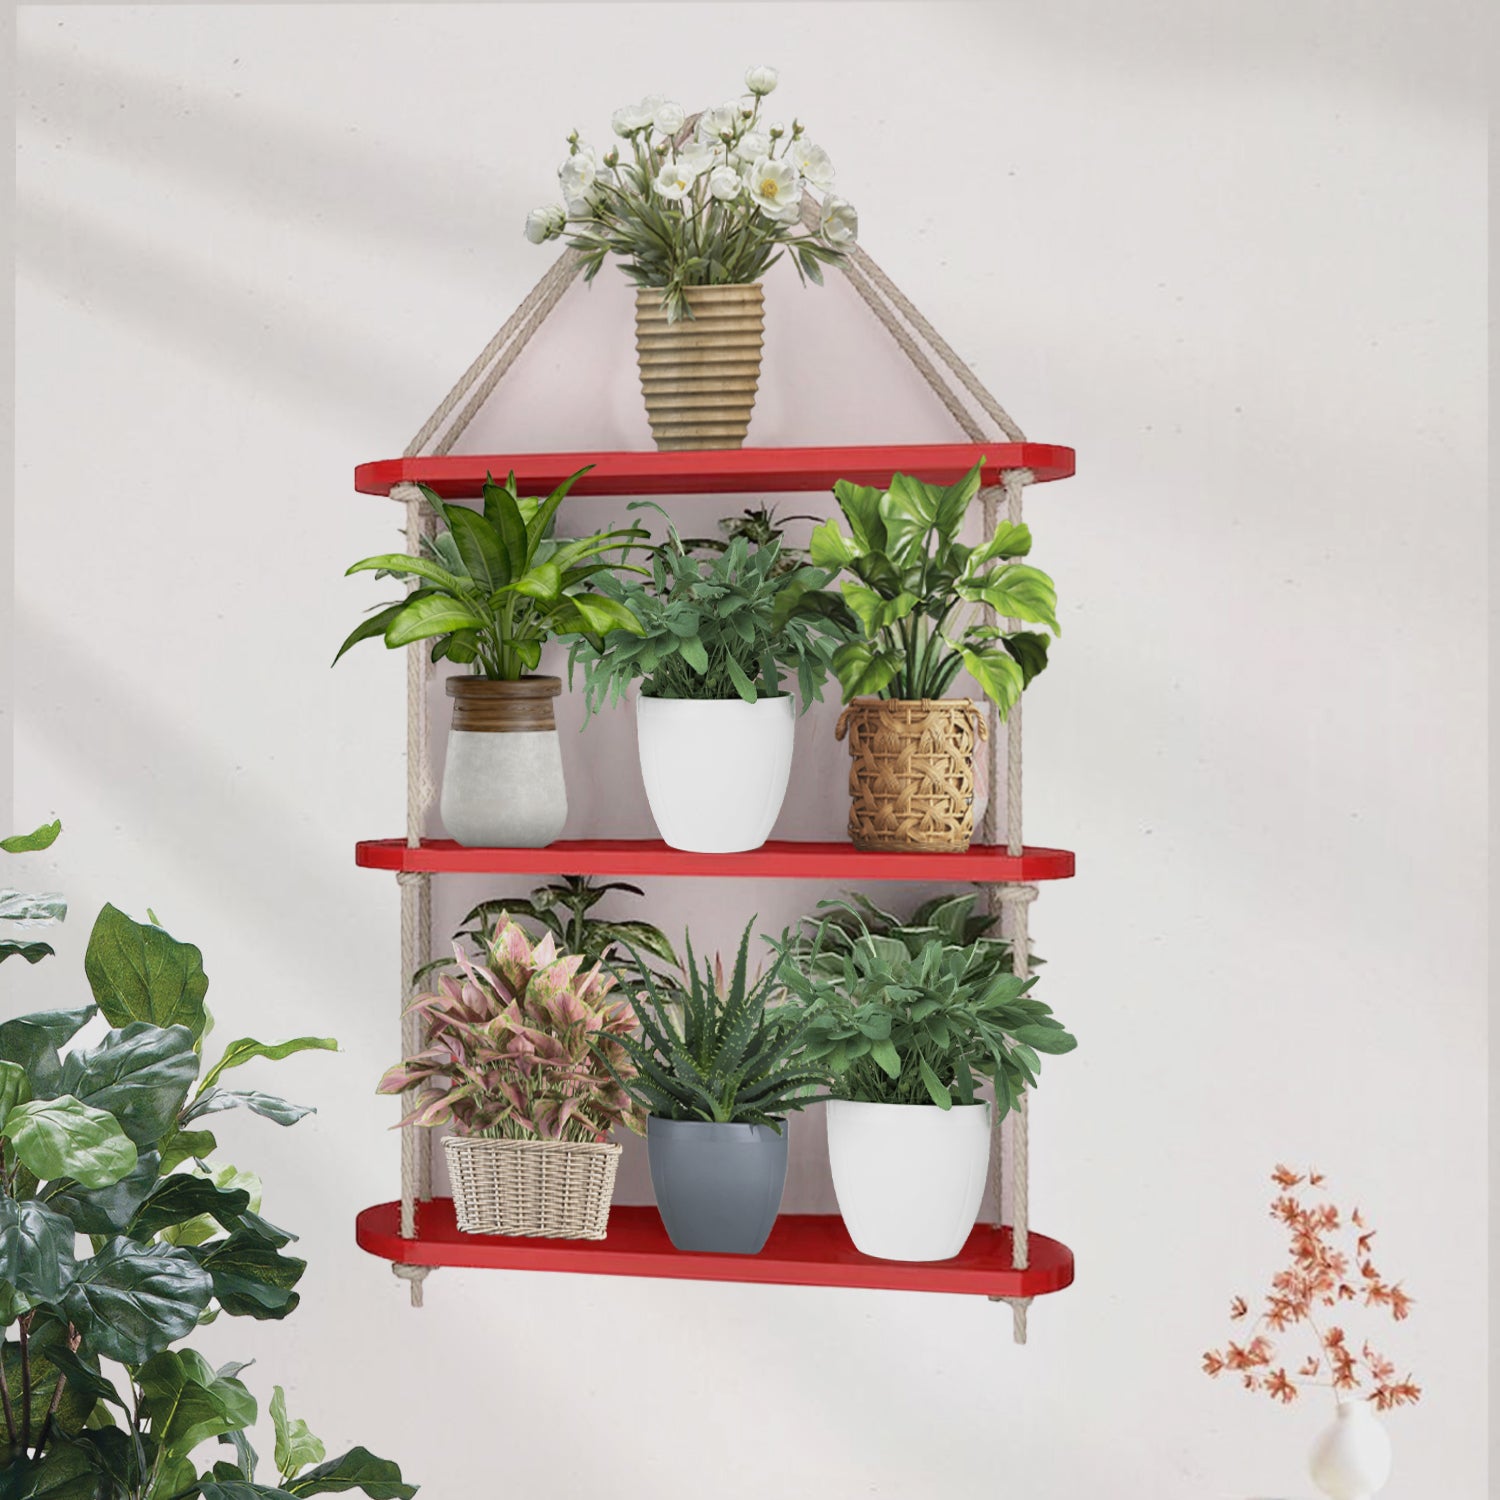 Wooden Wall Hanging Planter Shelf with Rope Three Layer (Red Color)